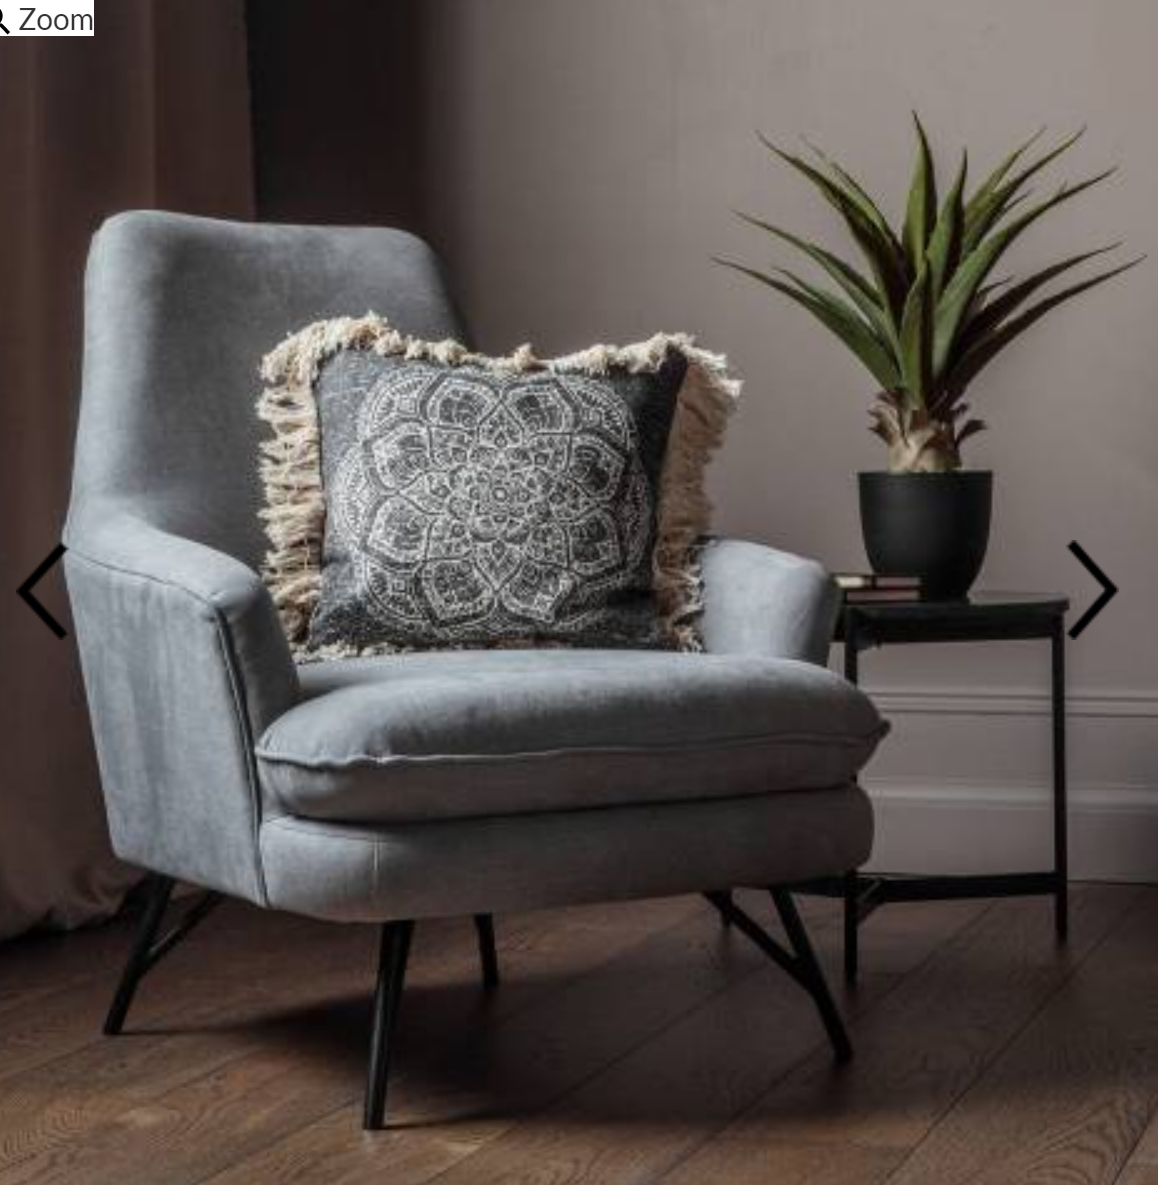 Radlett Chair Bailey Pewter The Radlett Chair Is The Latest Addition To Our Stunning Range Of